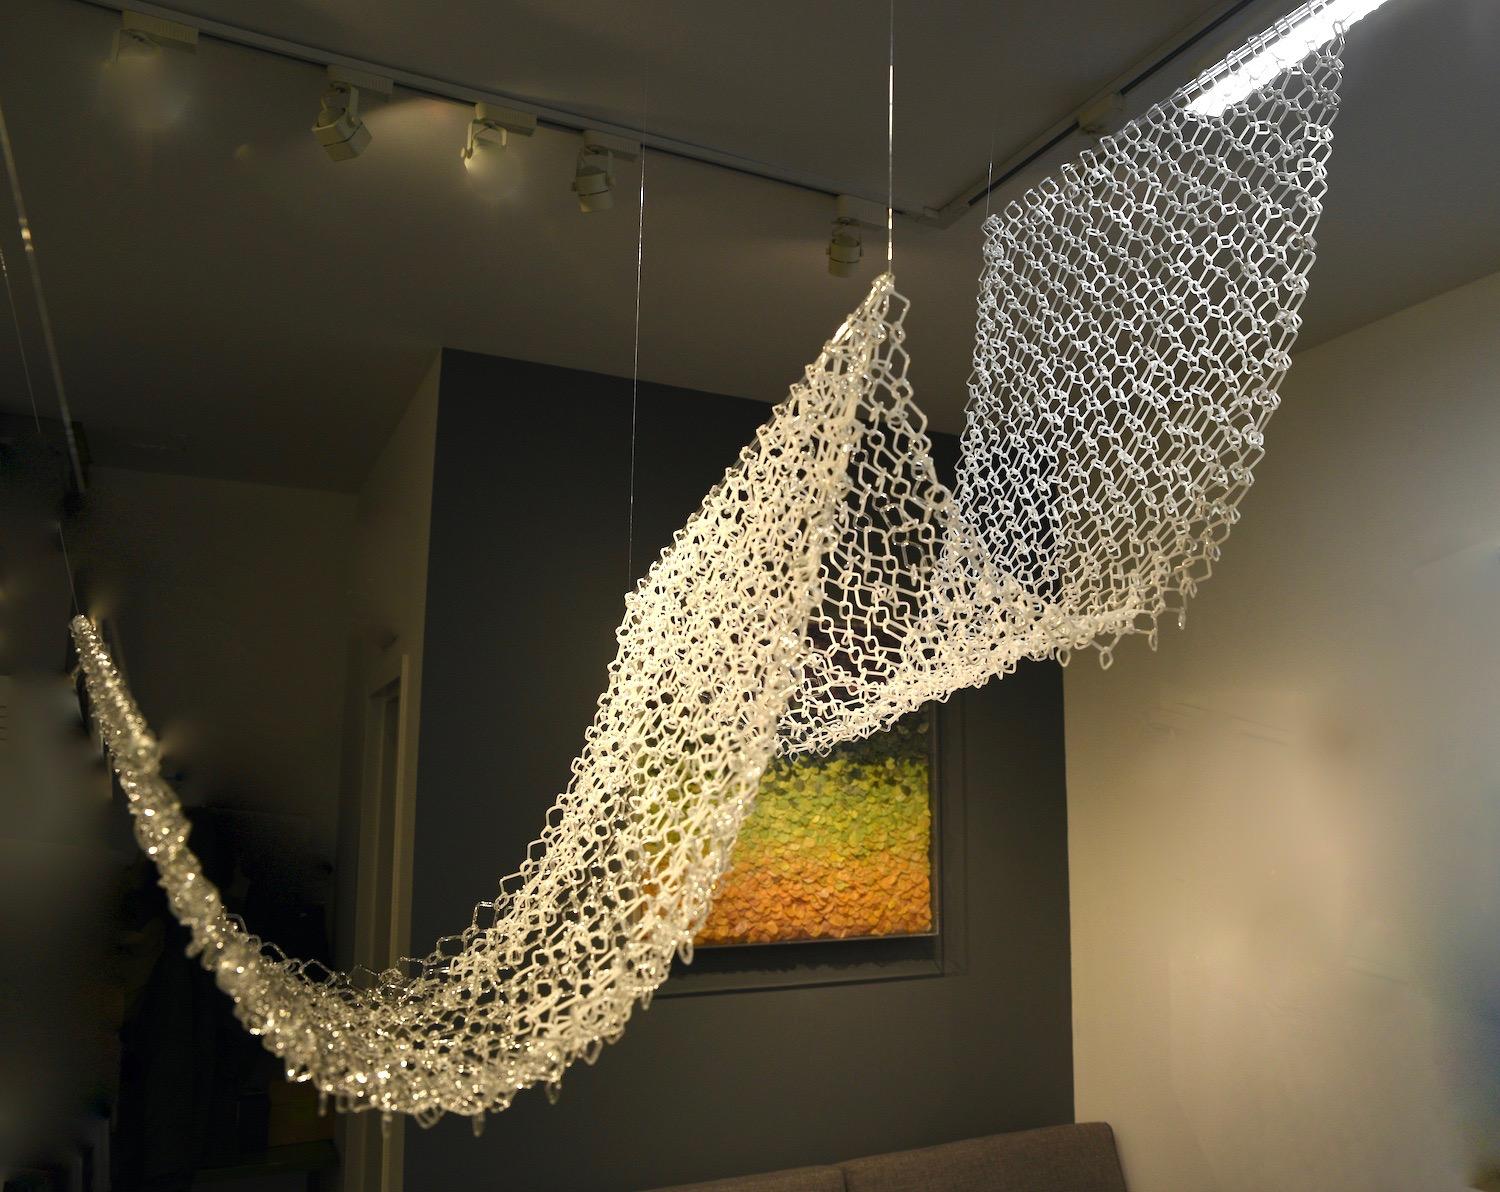 David Licata Abstract Sculpture - Frozen Falls, Long Hanging Sculpture of Torch-Worked Glass in Chain Maille Links